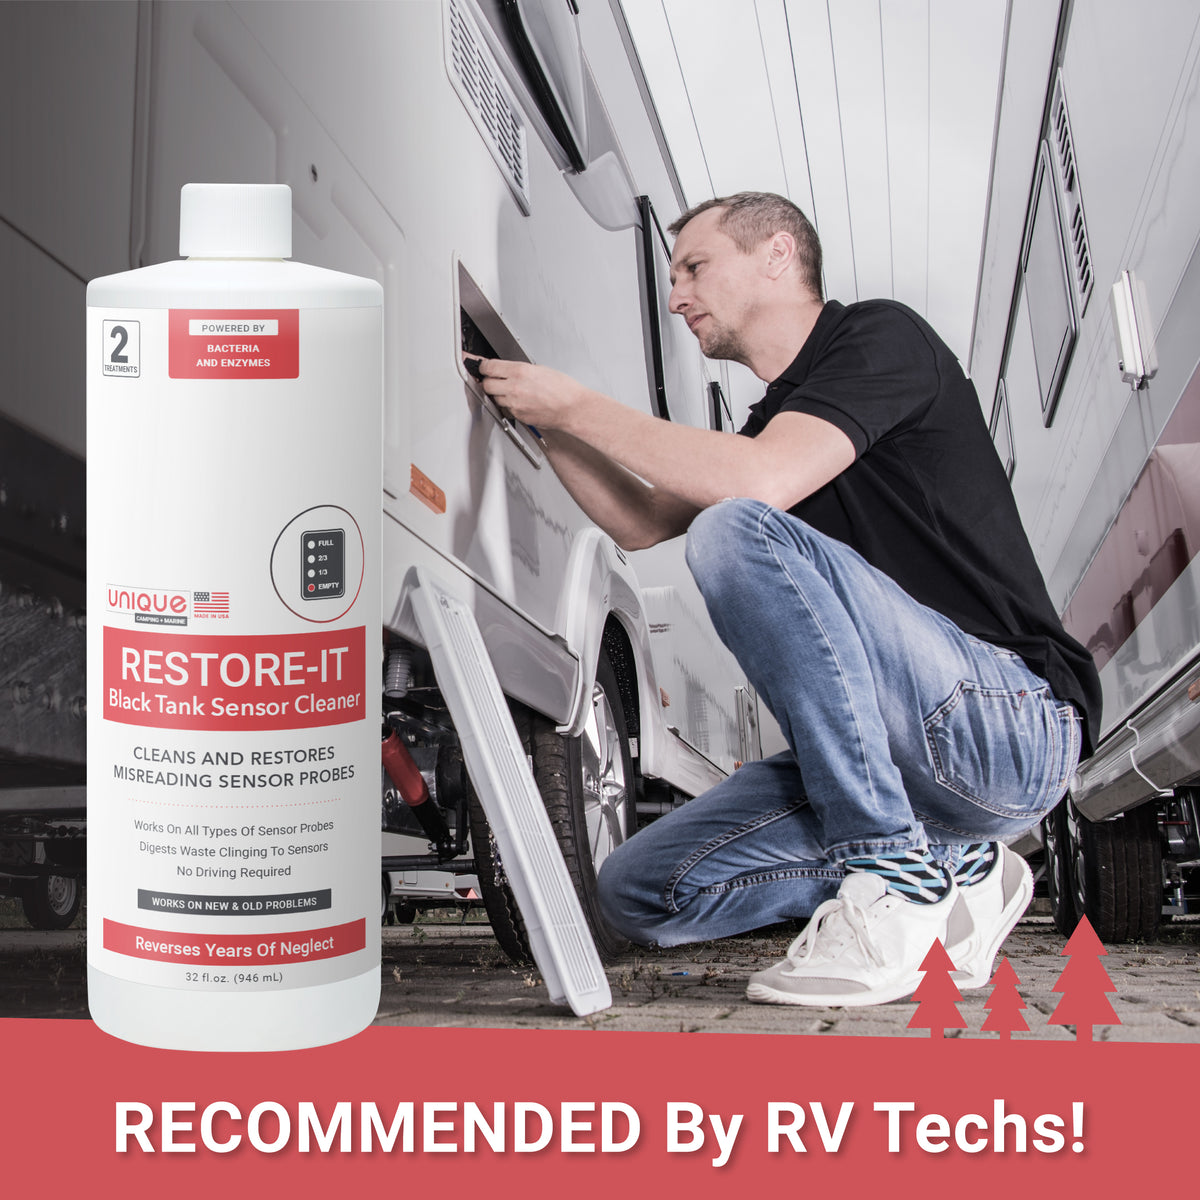 Restore-It comes recommended by RV technicians nationwide. Unique Camping + Marine